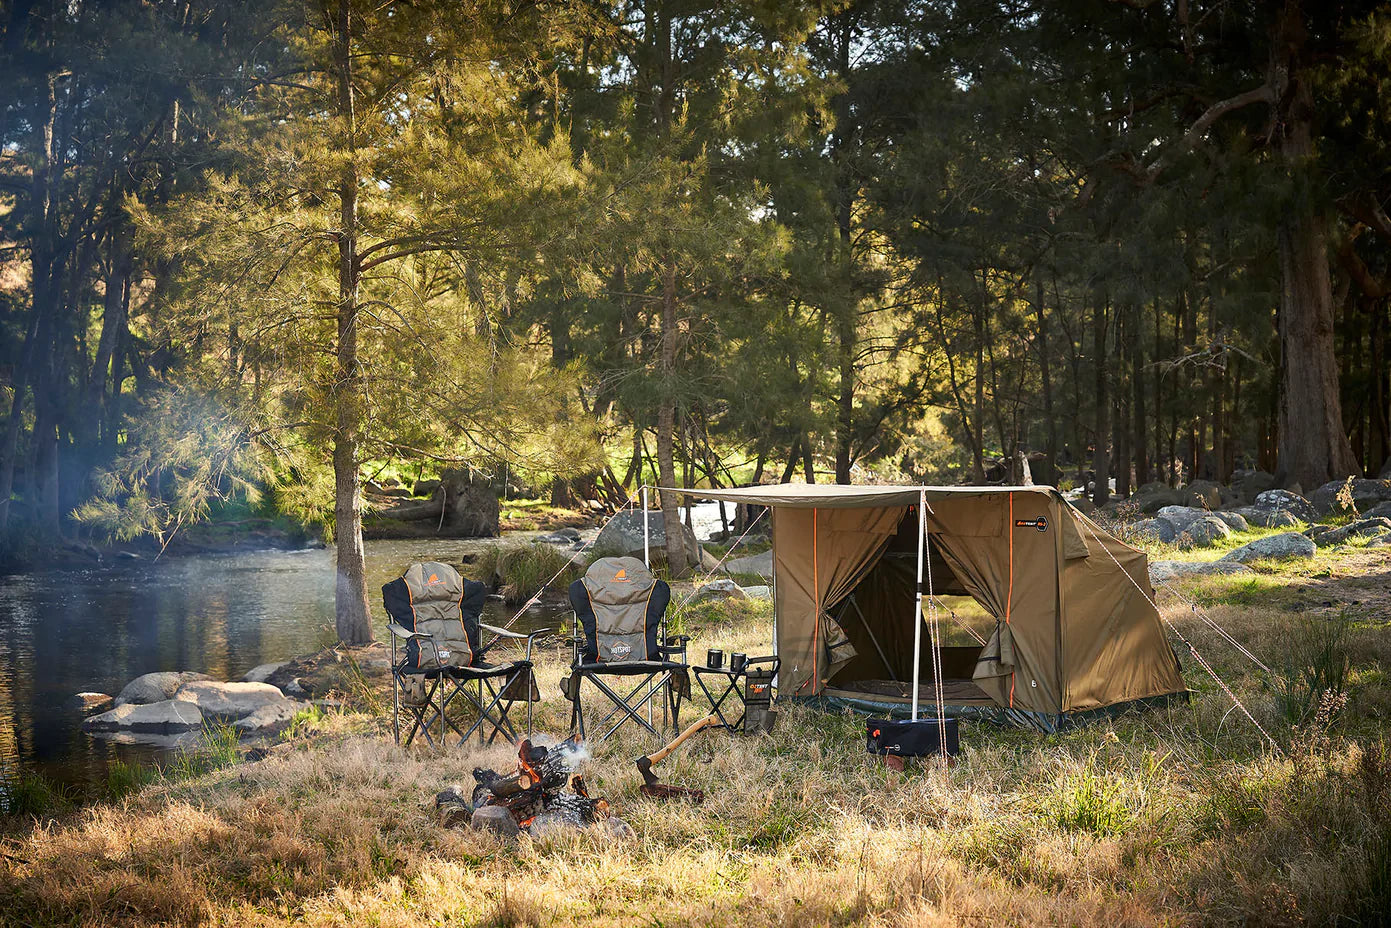 Oztent RS-2 Double Swag - One swag for two people. 30-Second setup. Built to last.